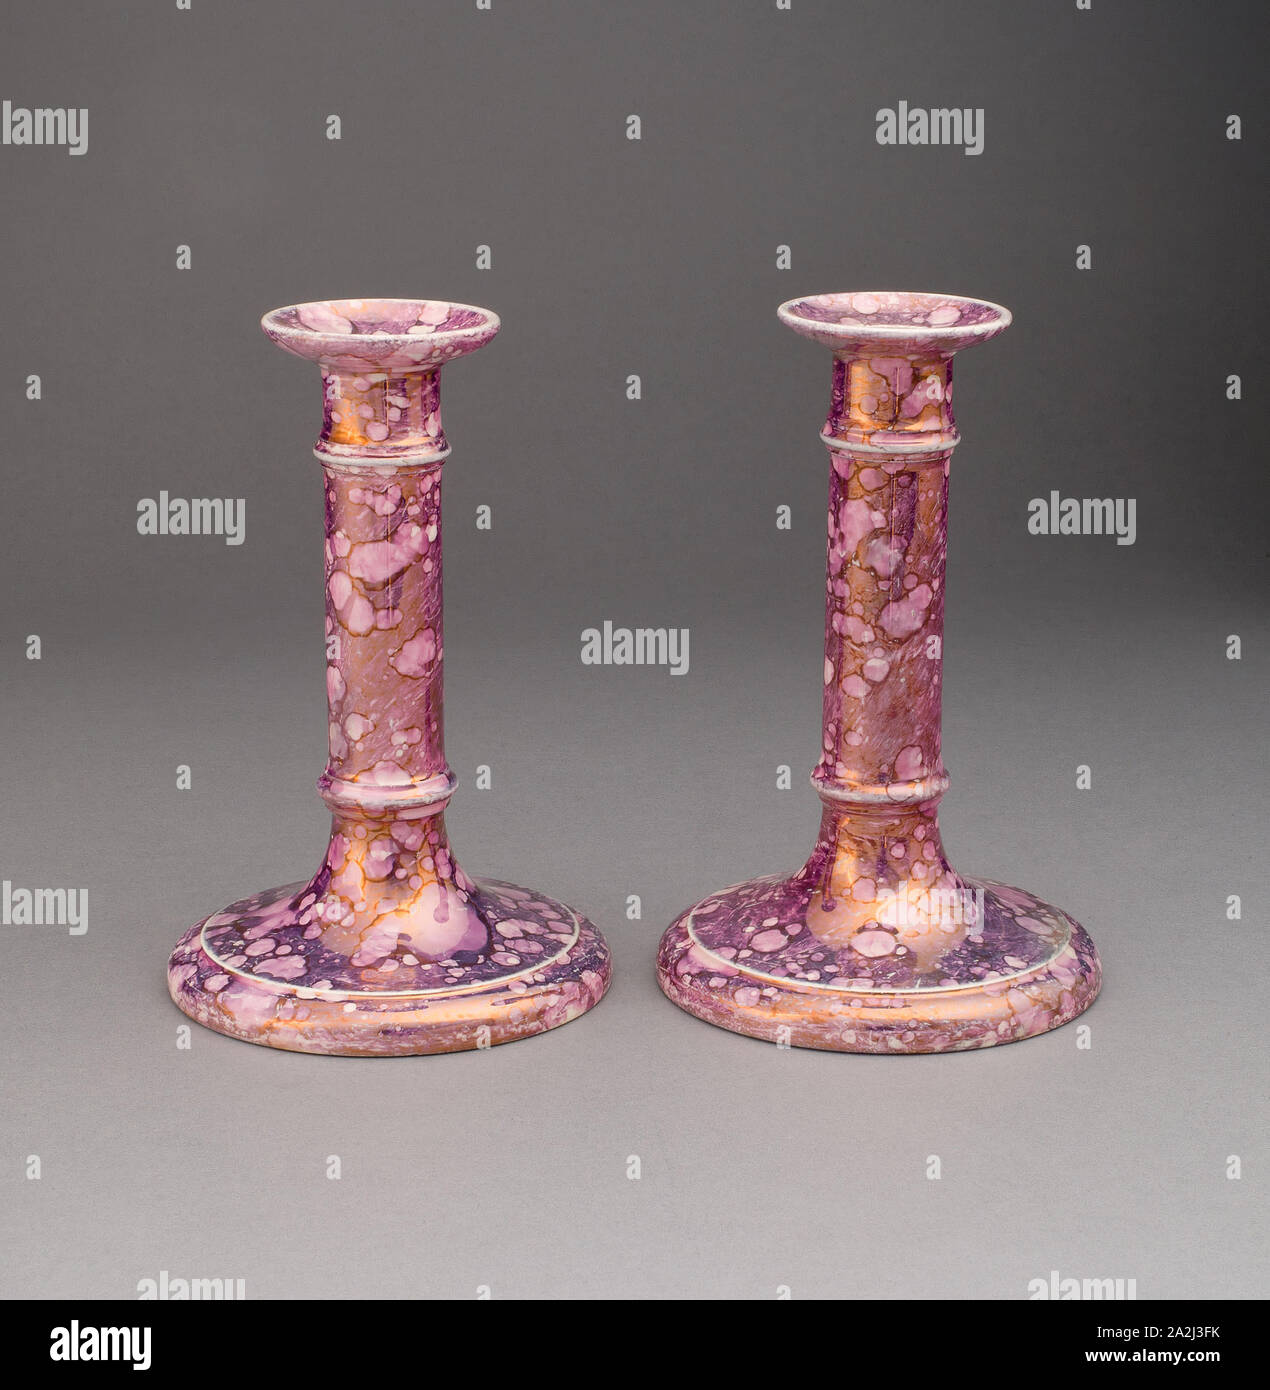 Candlestick (one of a pair), 1810/20, England, Sunderland, Sunderland, Lead-glazed earthenware with lustre decoration, H. 15.9 cm (6 1/4 in Stock Photo